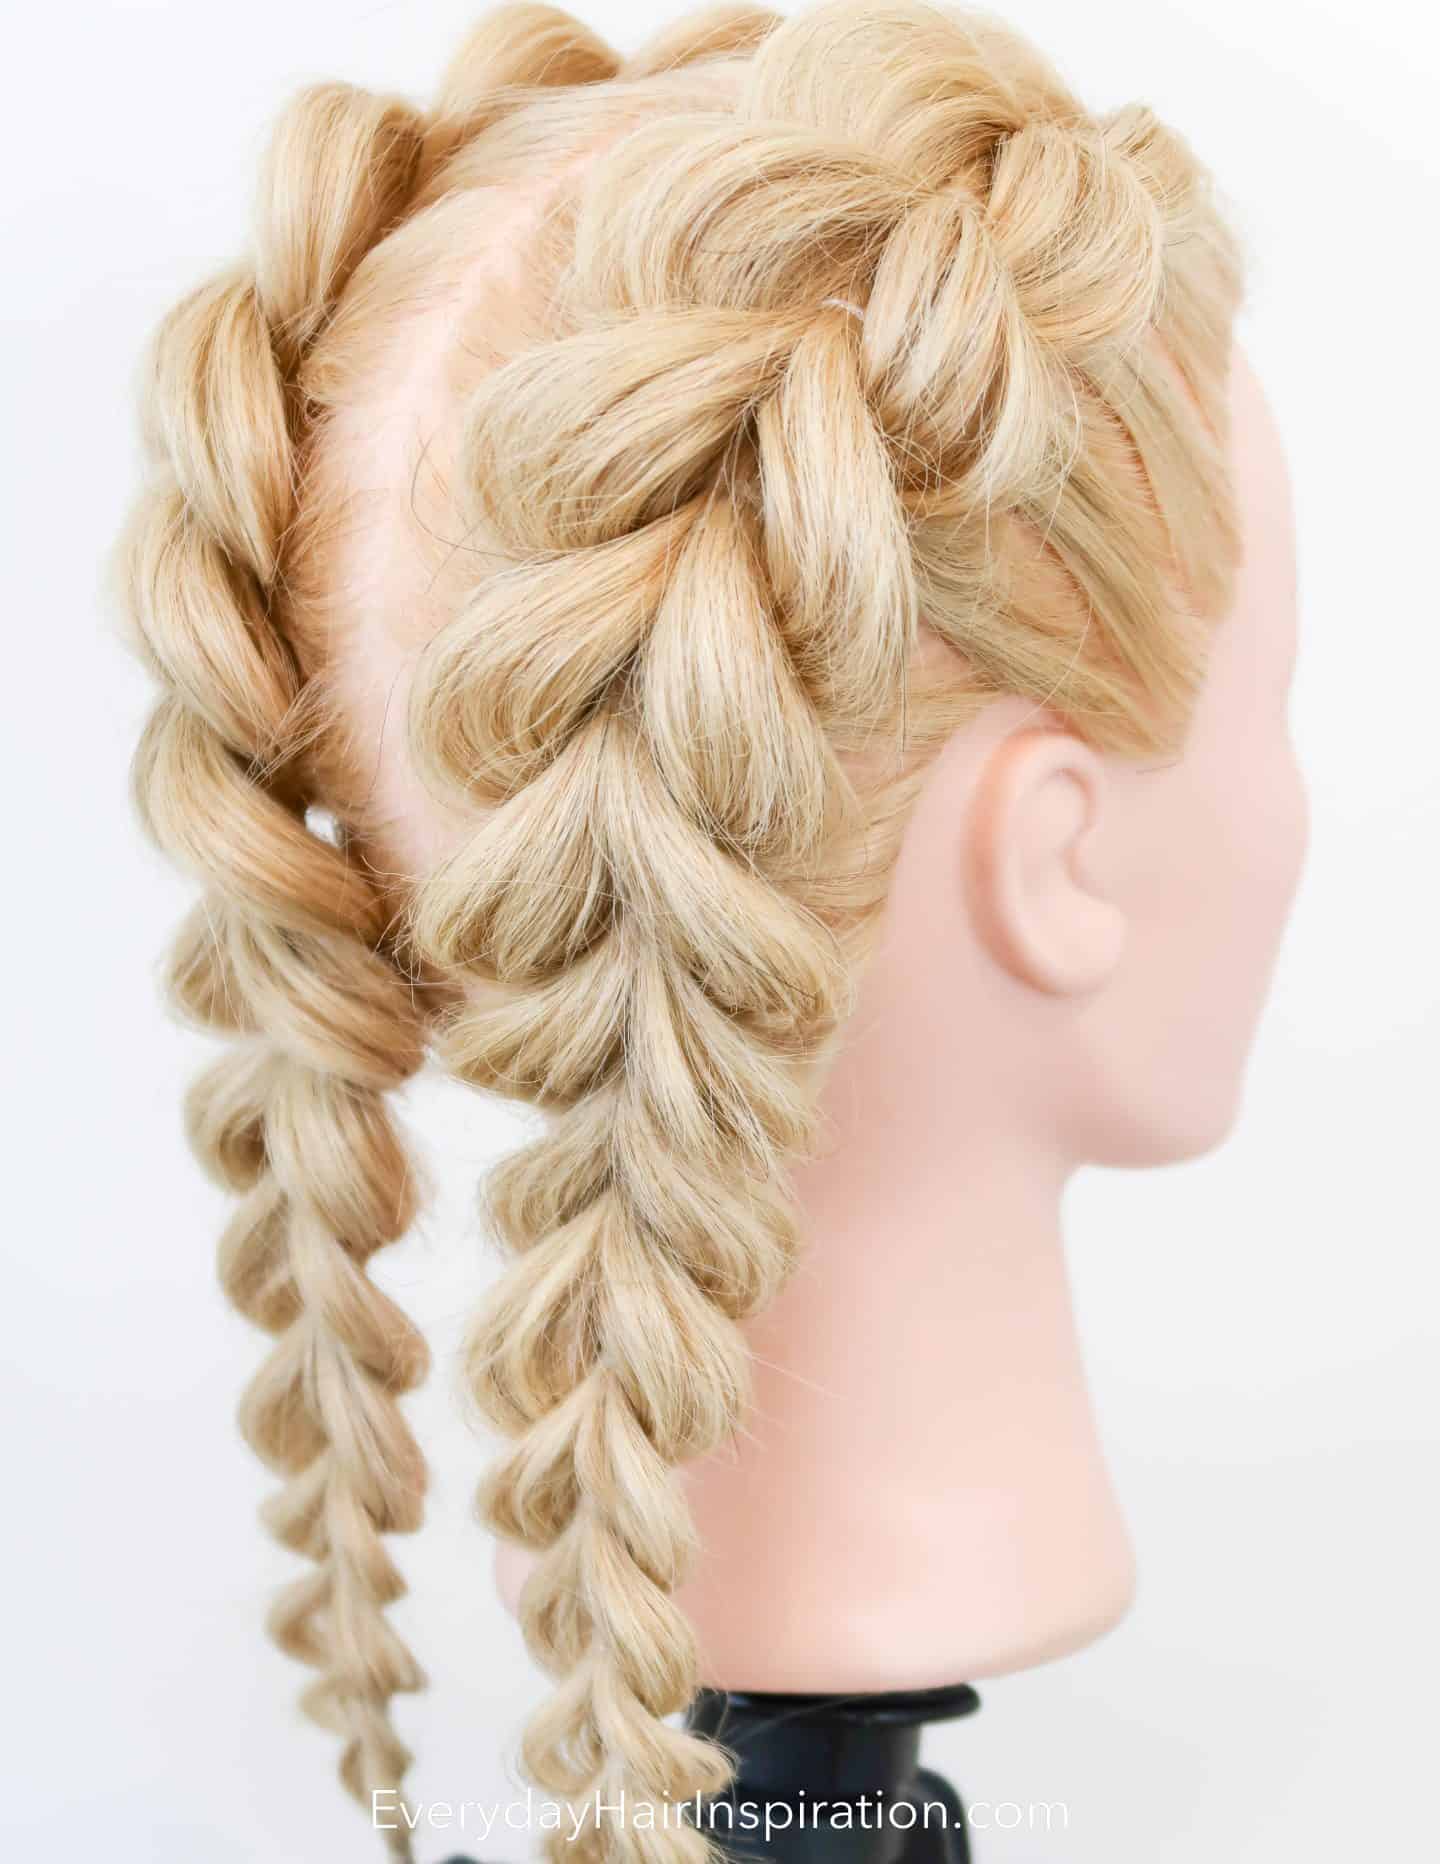 Braid Your Hair Without Looking : 9 Steps (with Pictures